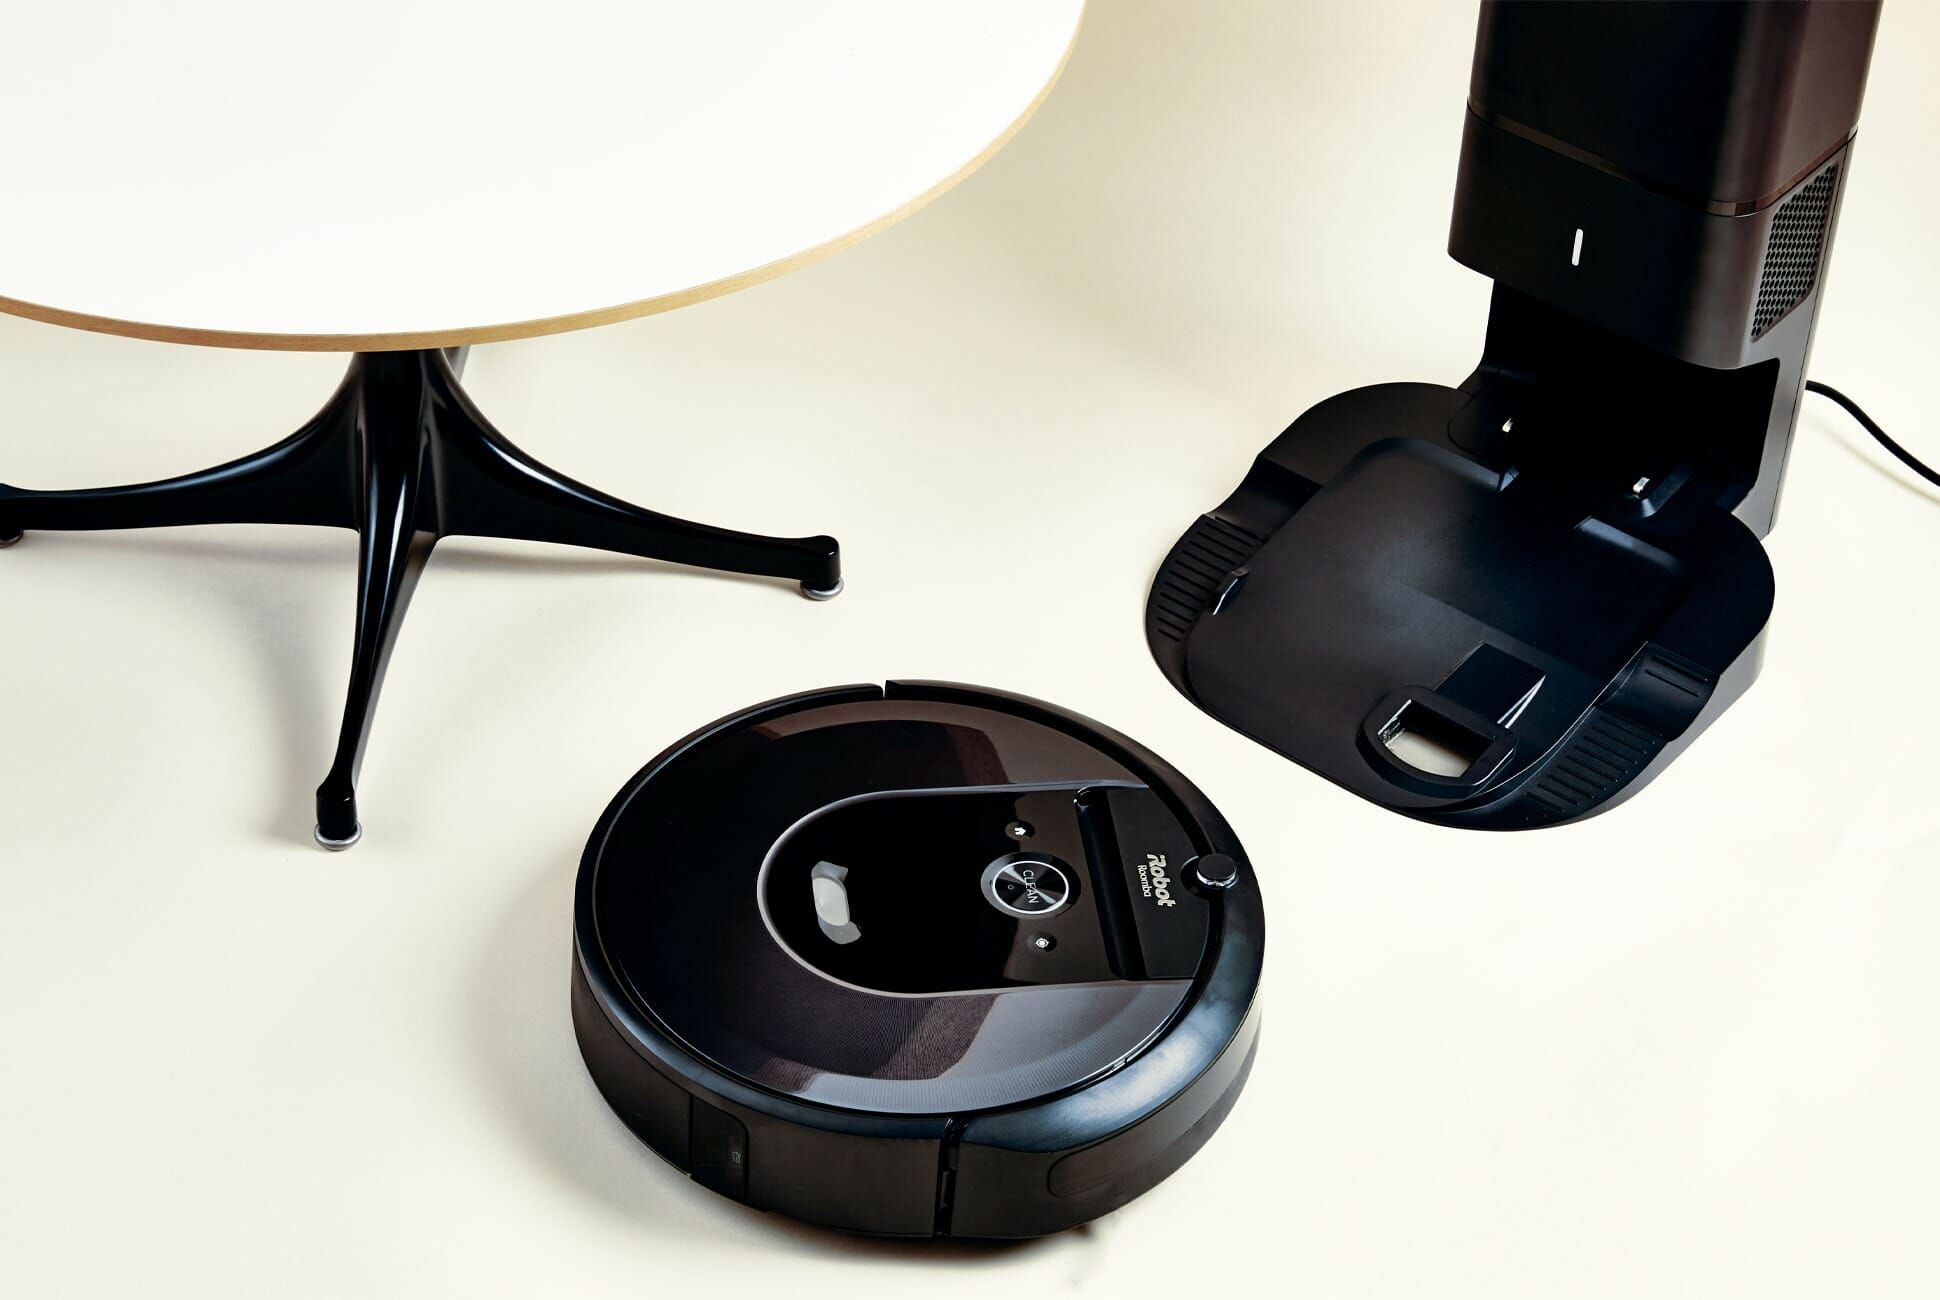 Roomba Review: This Is the Best Robot Vacuum